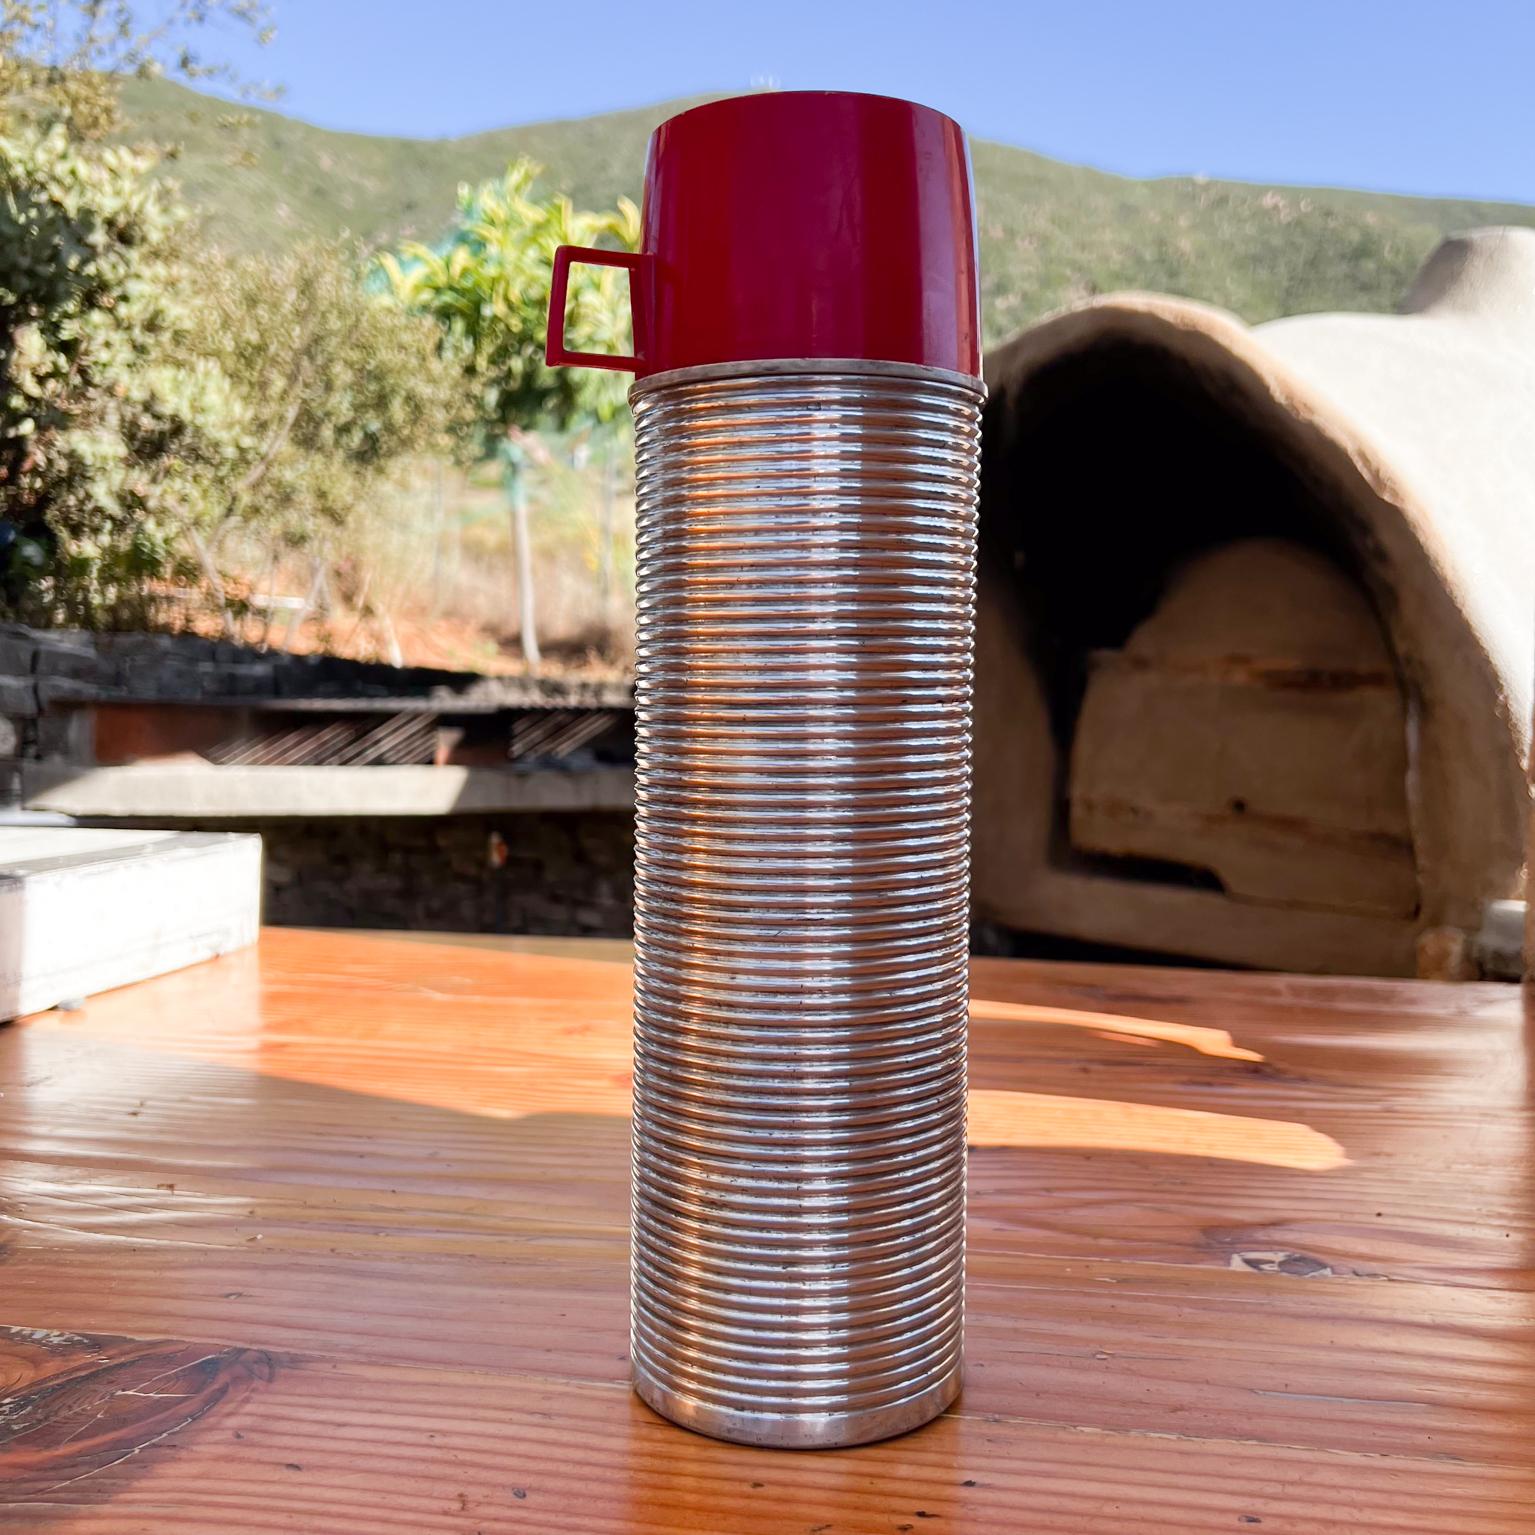 1970s thermos